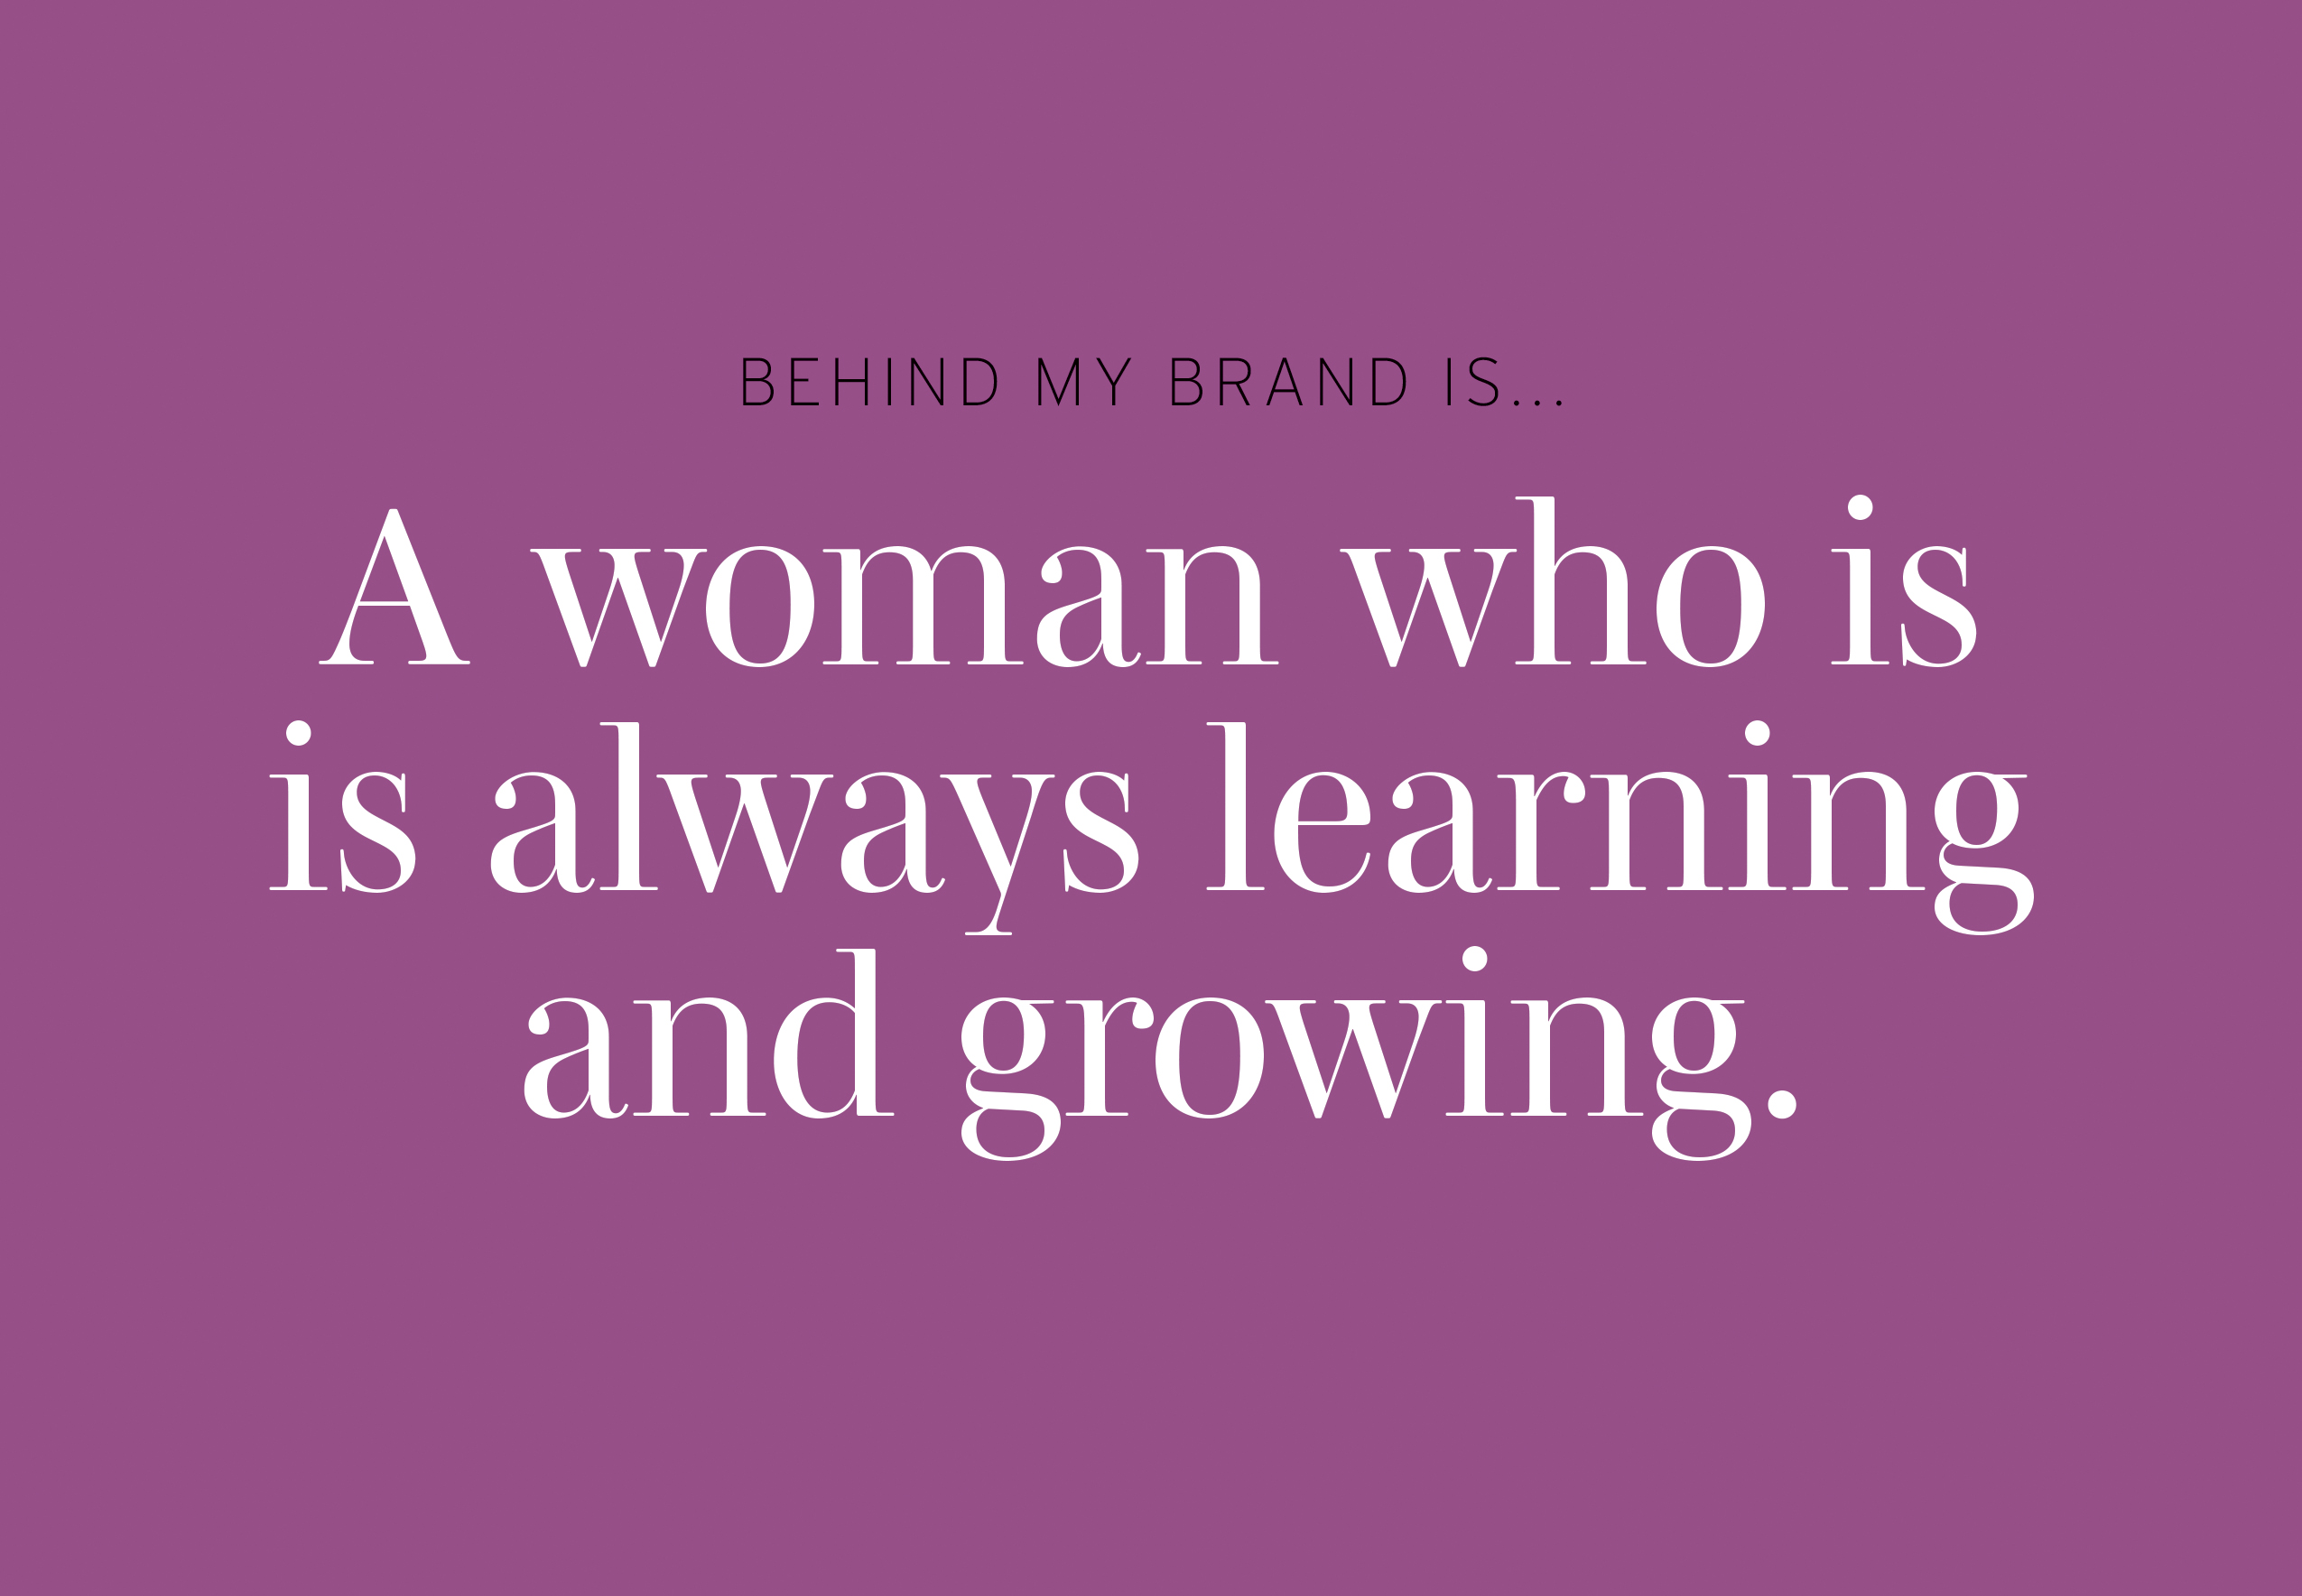 Behind my Brand is a woman who is always learning and growing.